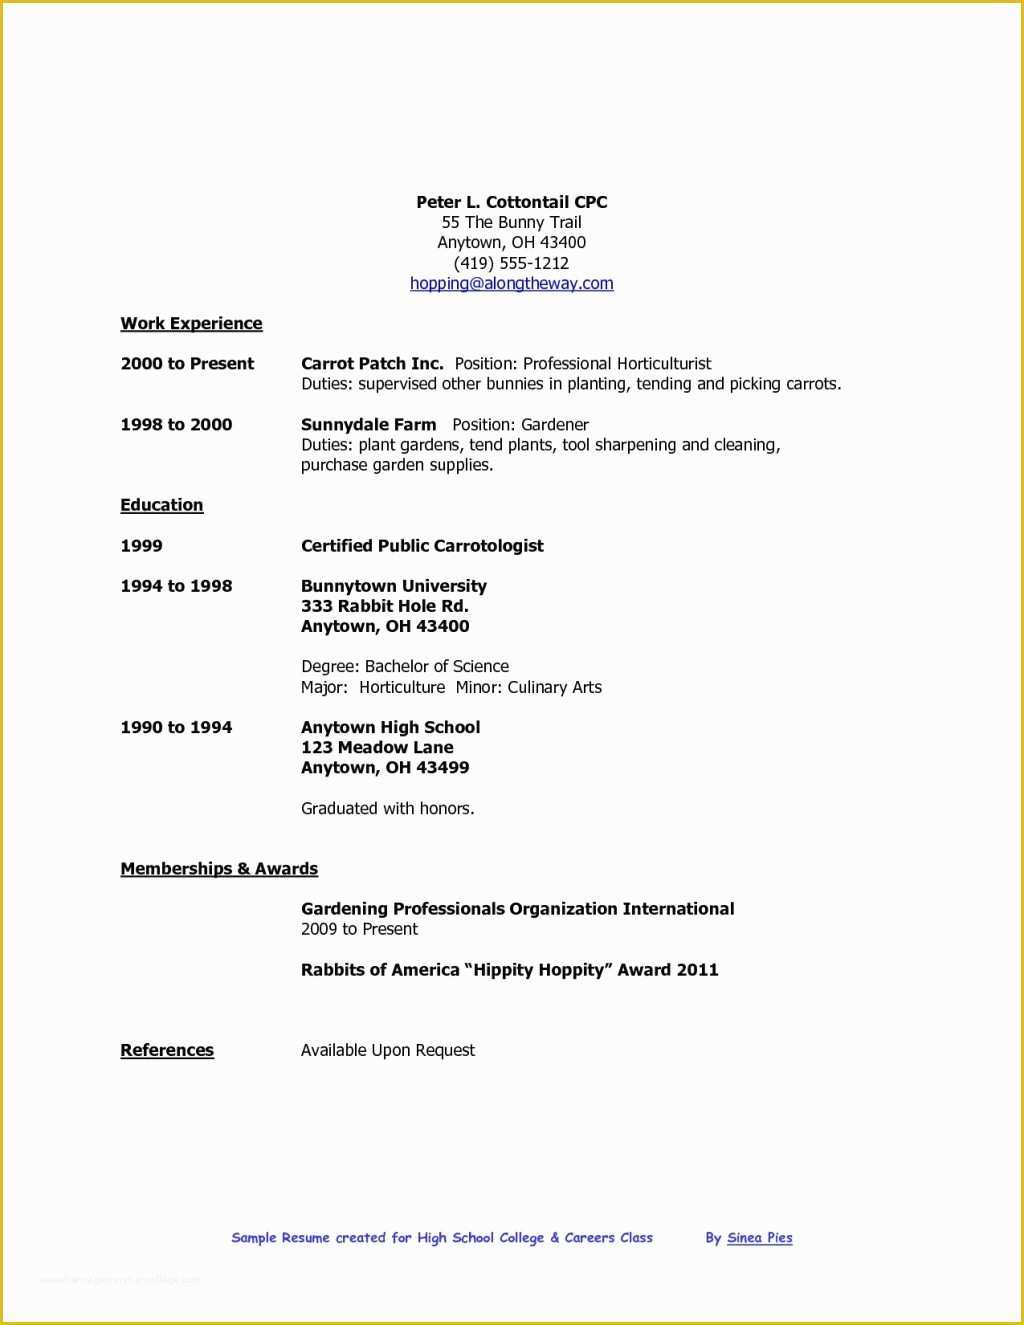 Free Resume Templates for No Work Experience Of Resume Template Resume Template Free Templates for